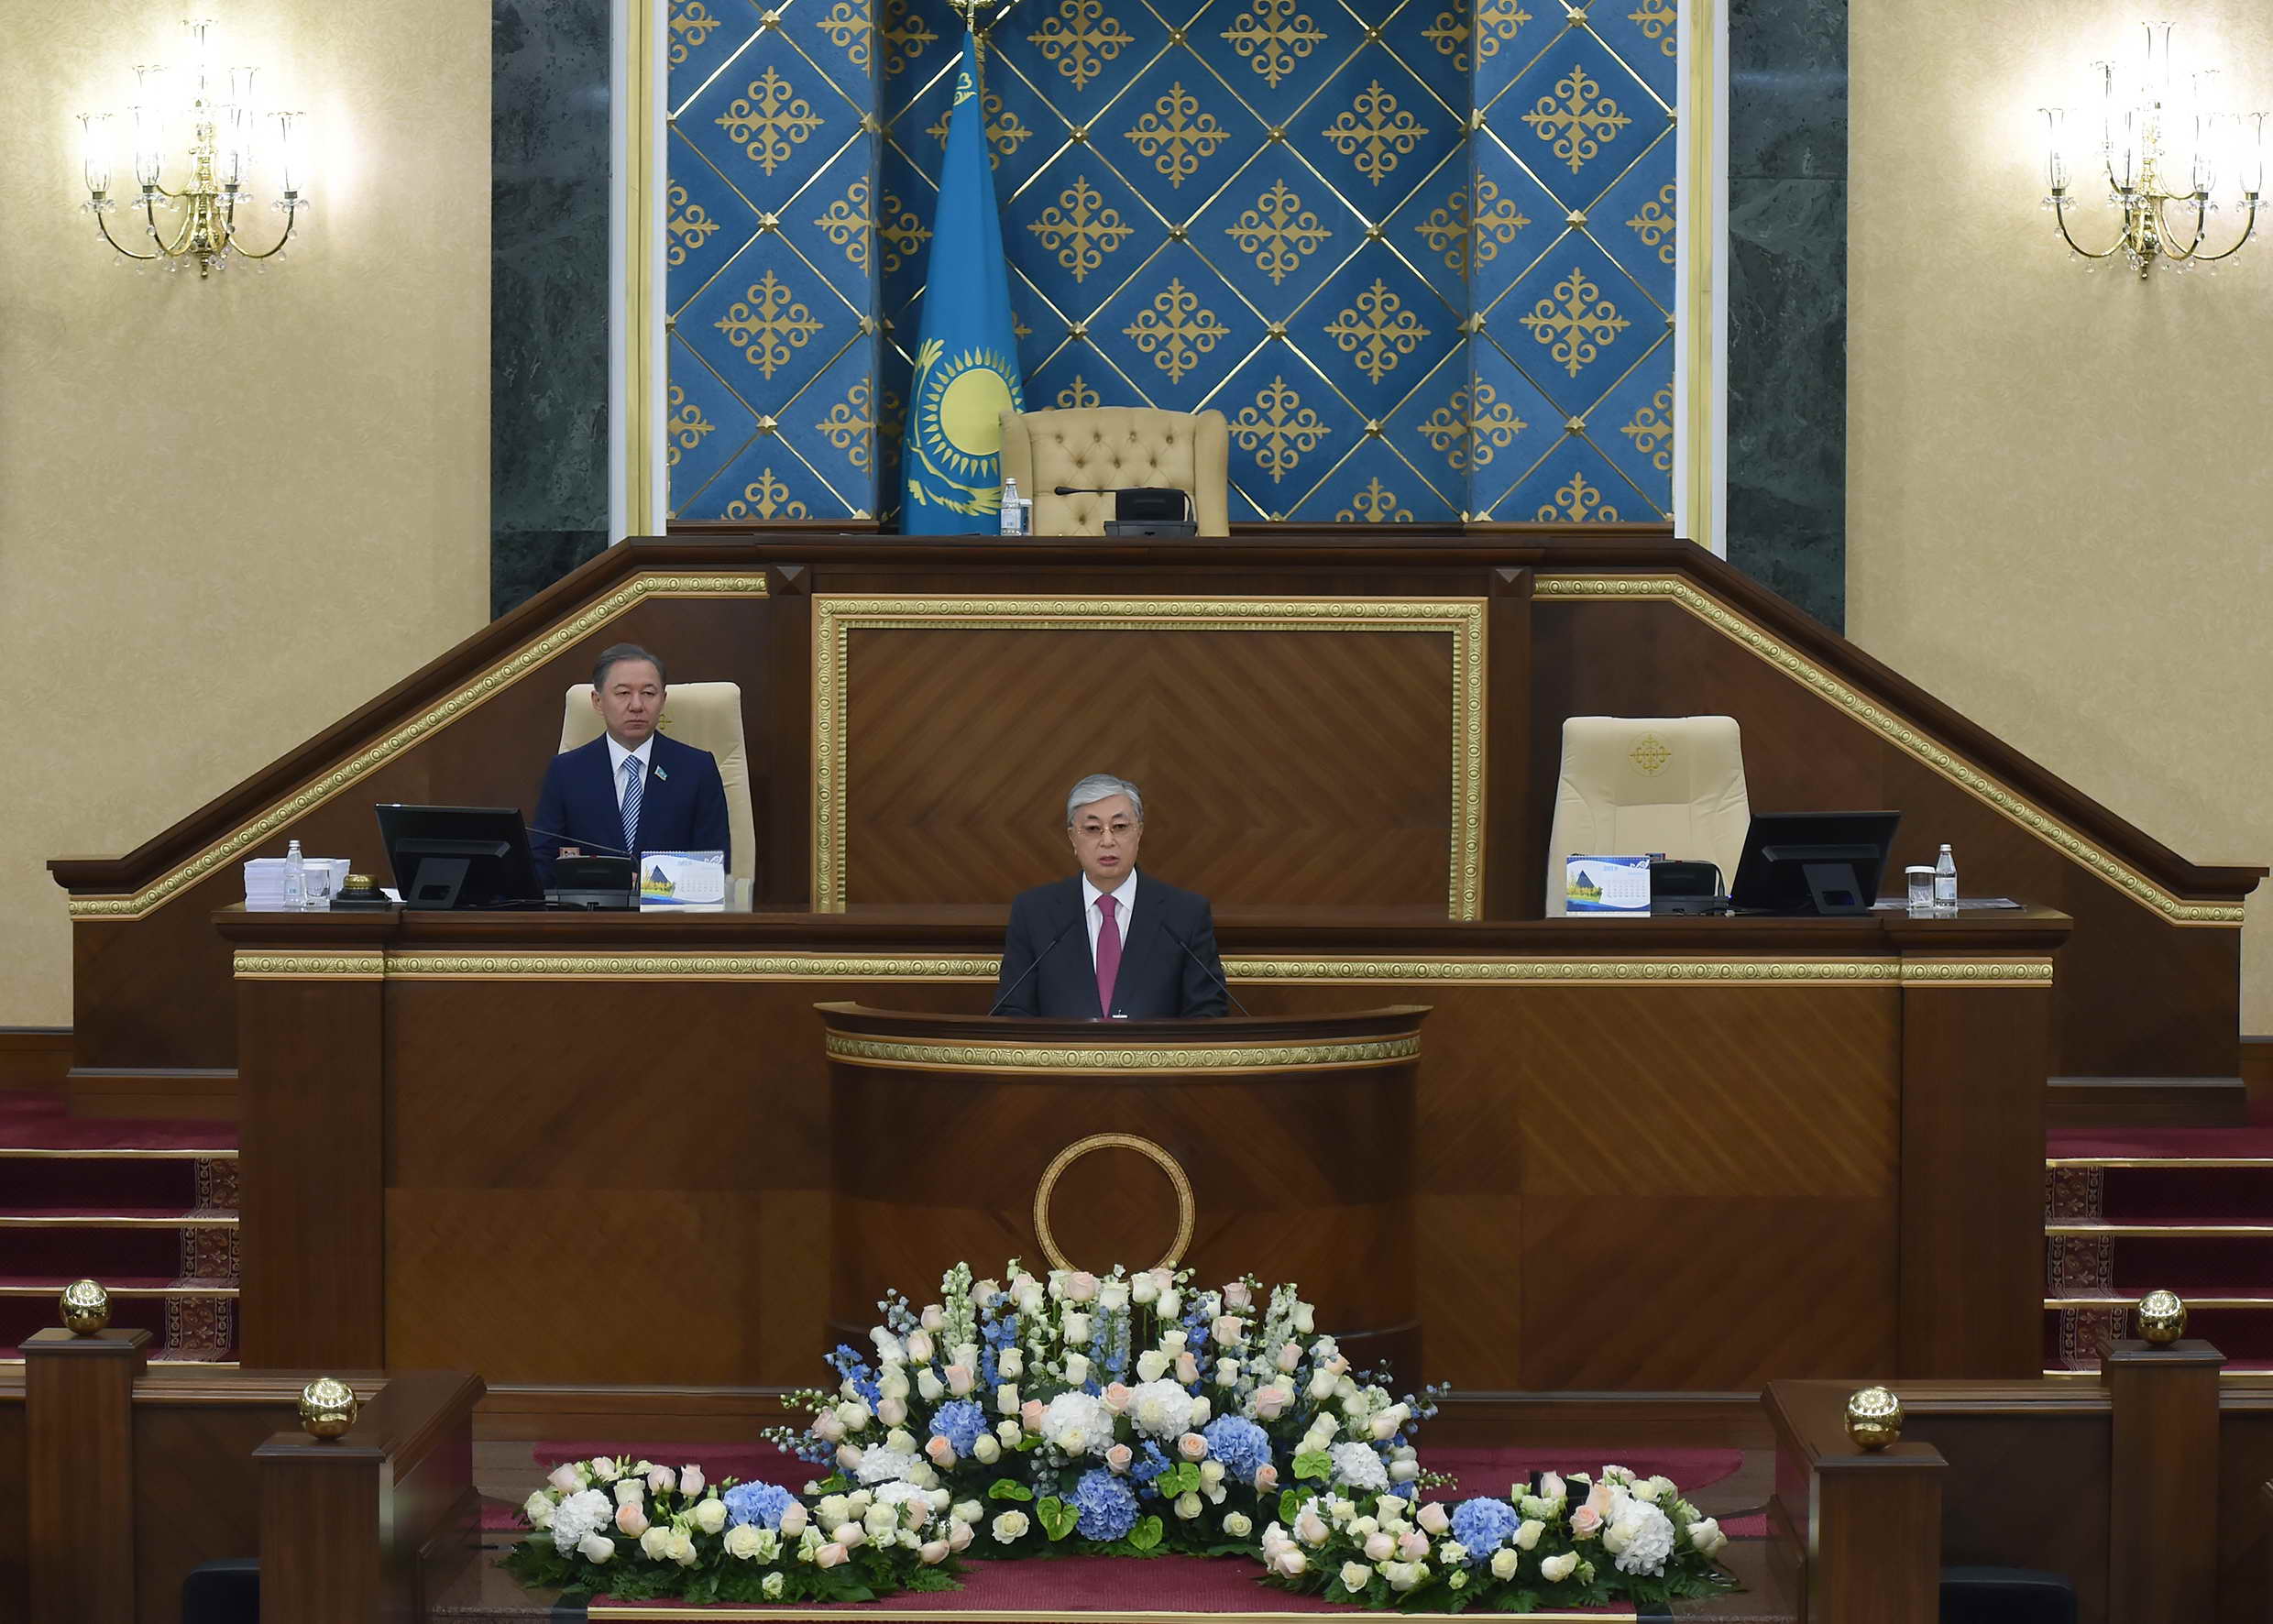 Kassym-Jomart Tokayev delivered his State of the Nation Address